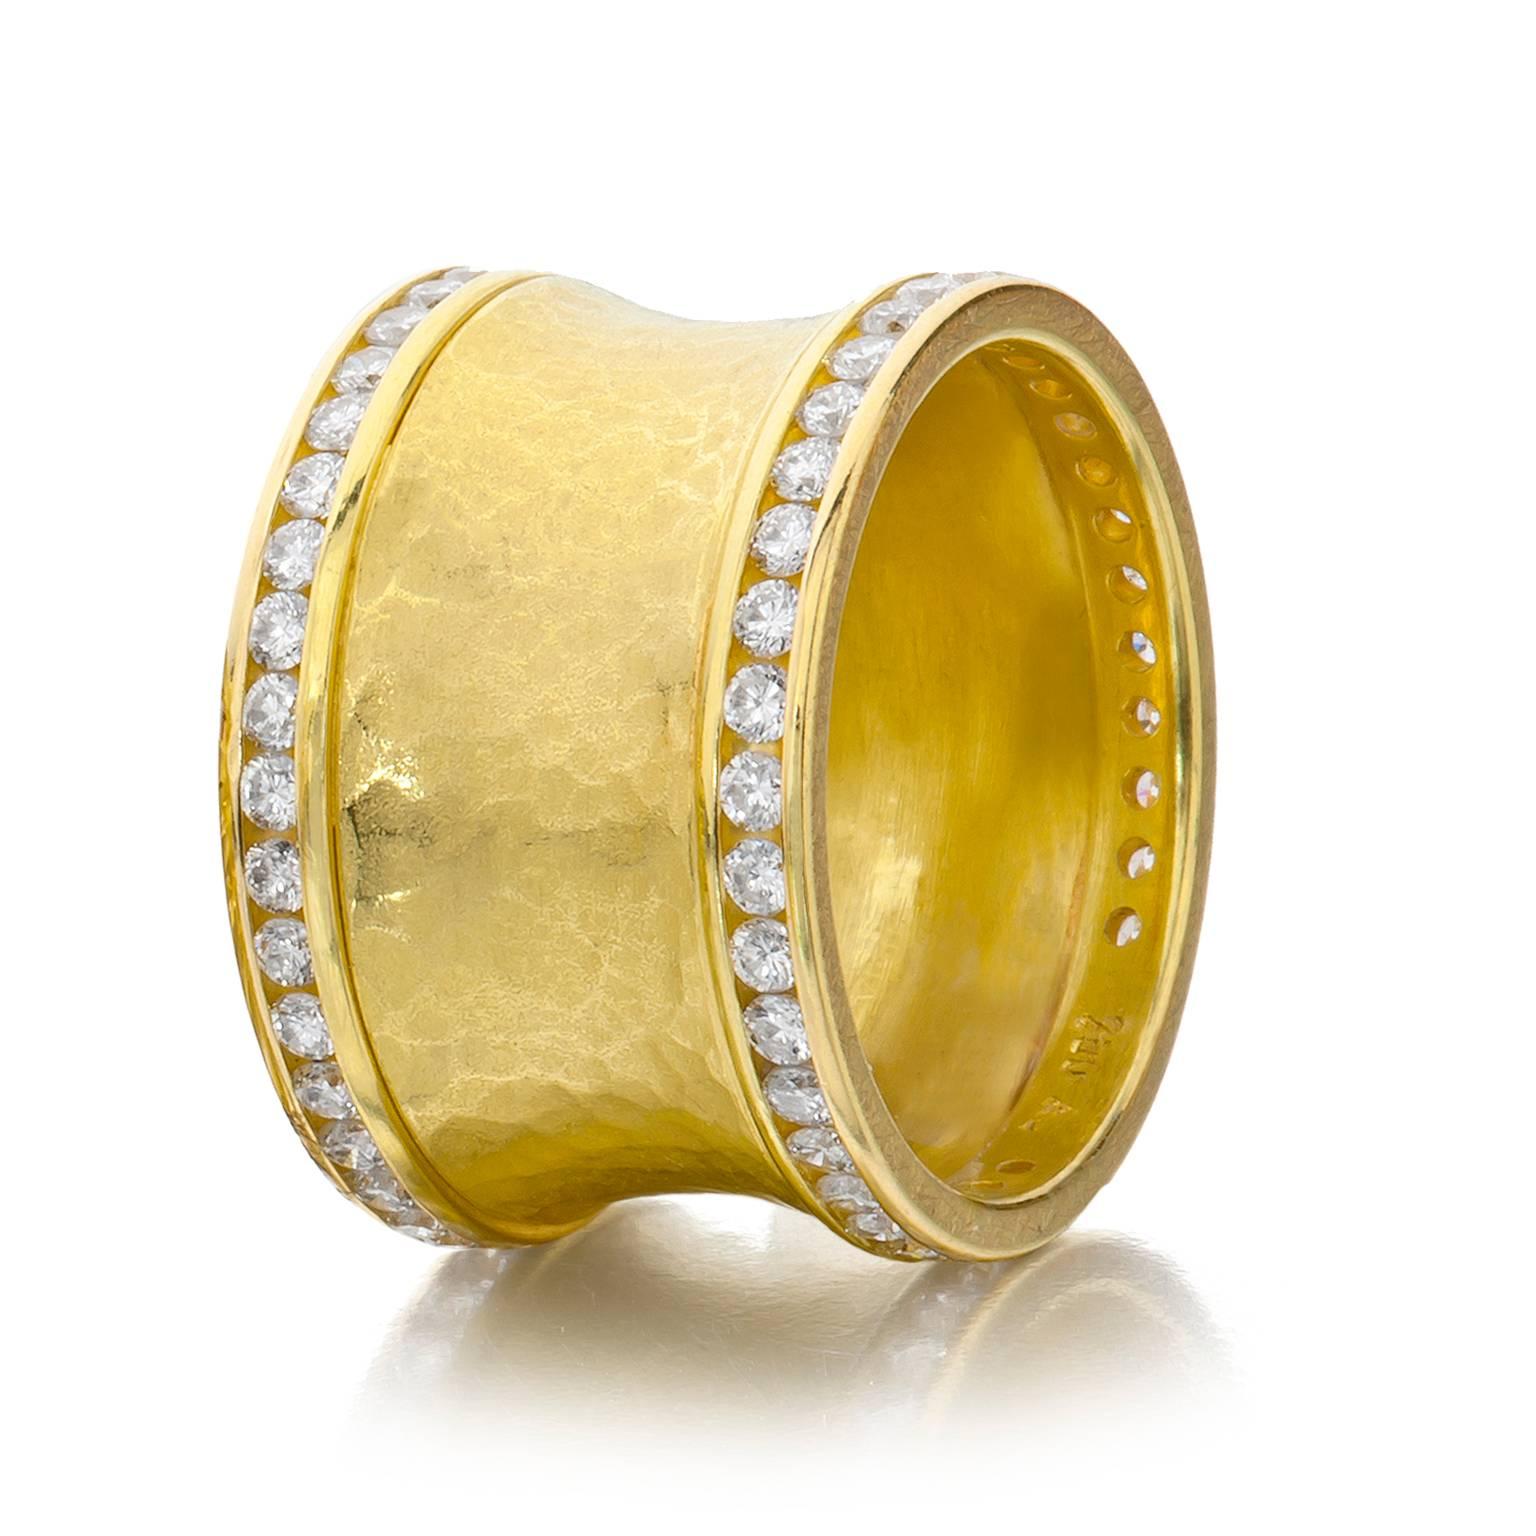 Curve Band handcrafted in 18k yellow gold featuring channel-set round brilliant-cut white diamonds totaling 1.24 carats and a signature hand-hammered finish accented with polished 18k yellow gold. (Size 7.5, 13mm wide).